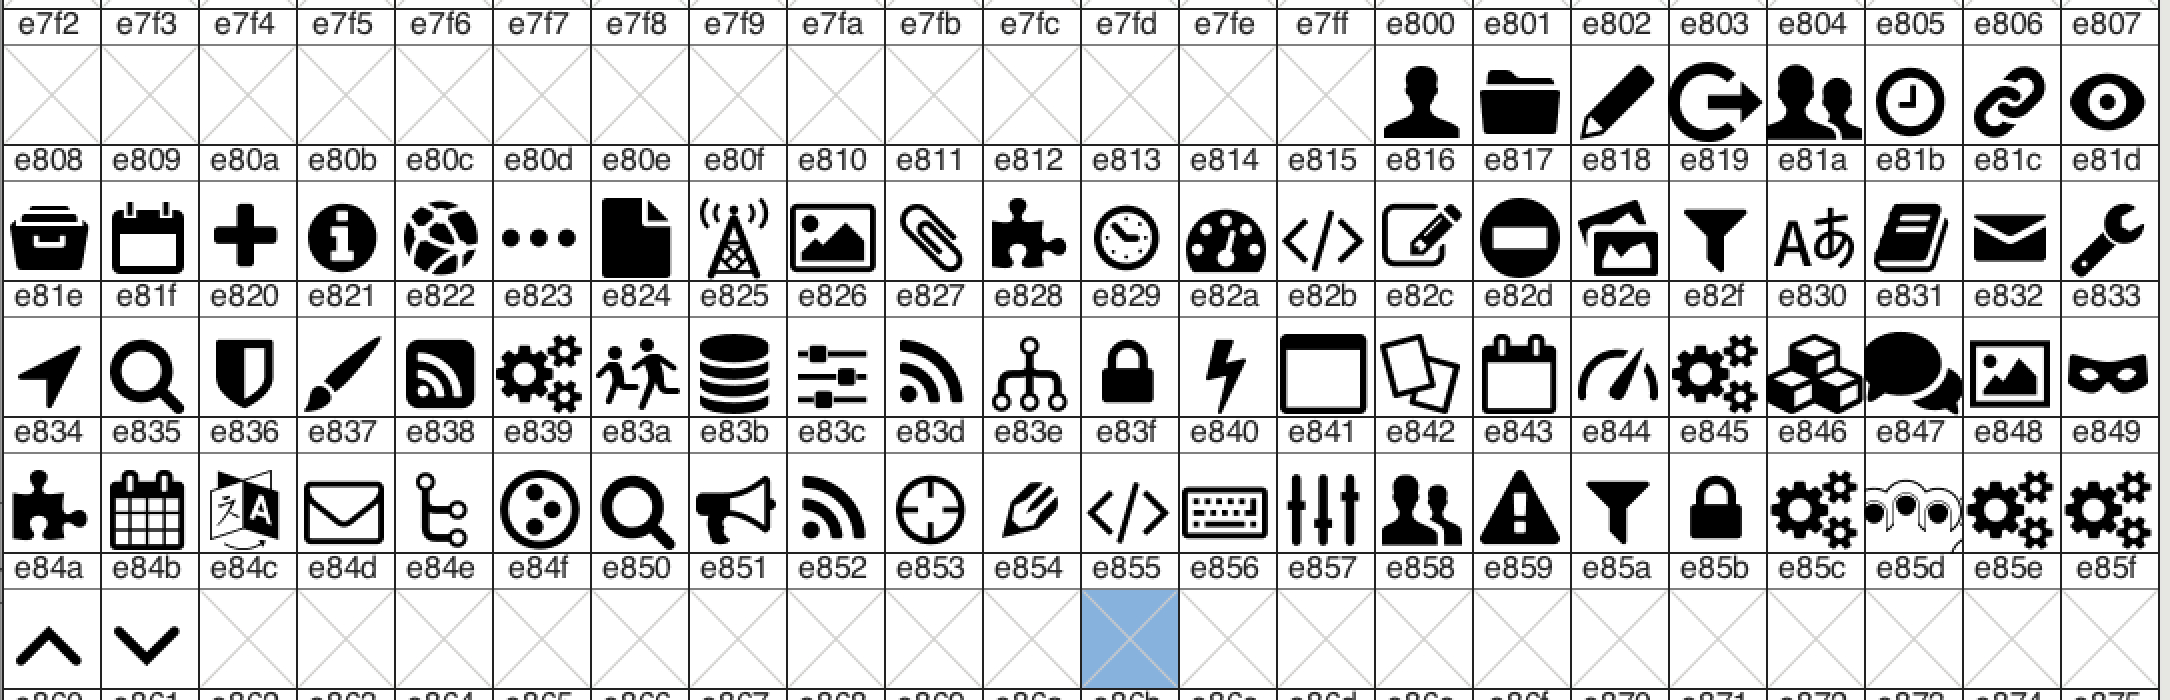 Fontello Font, Icons For P5 Toolbar  Using Plone  Plone in Calendar Icon Unicode